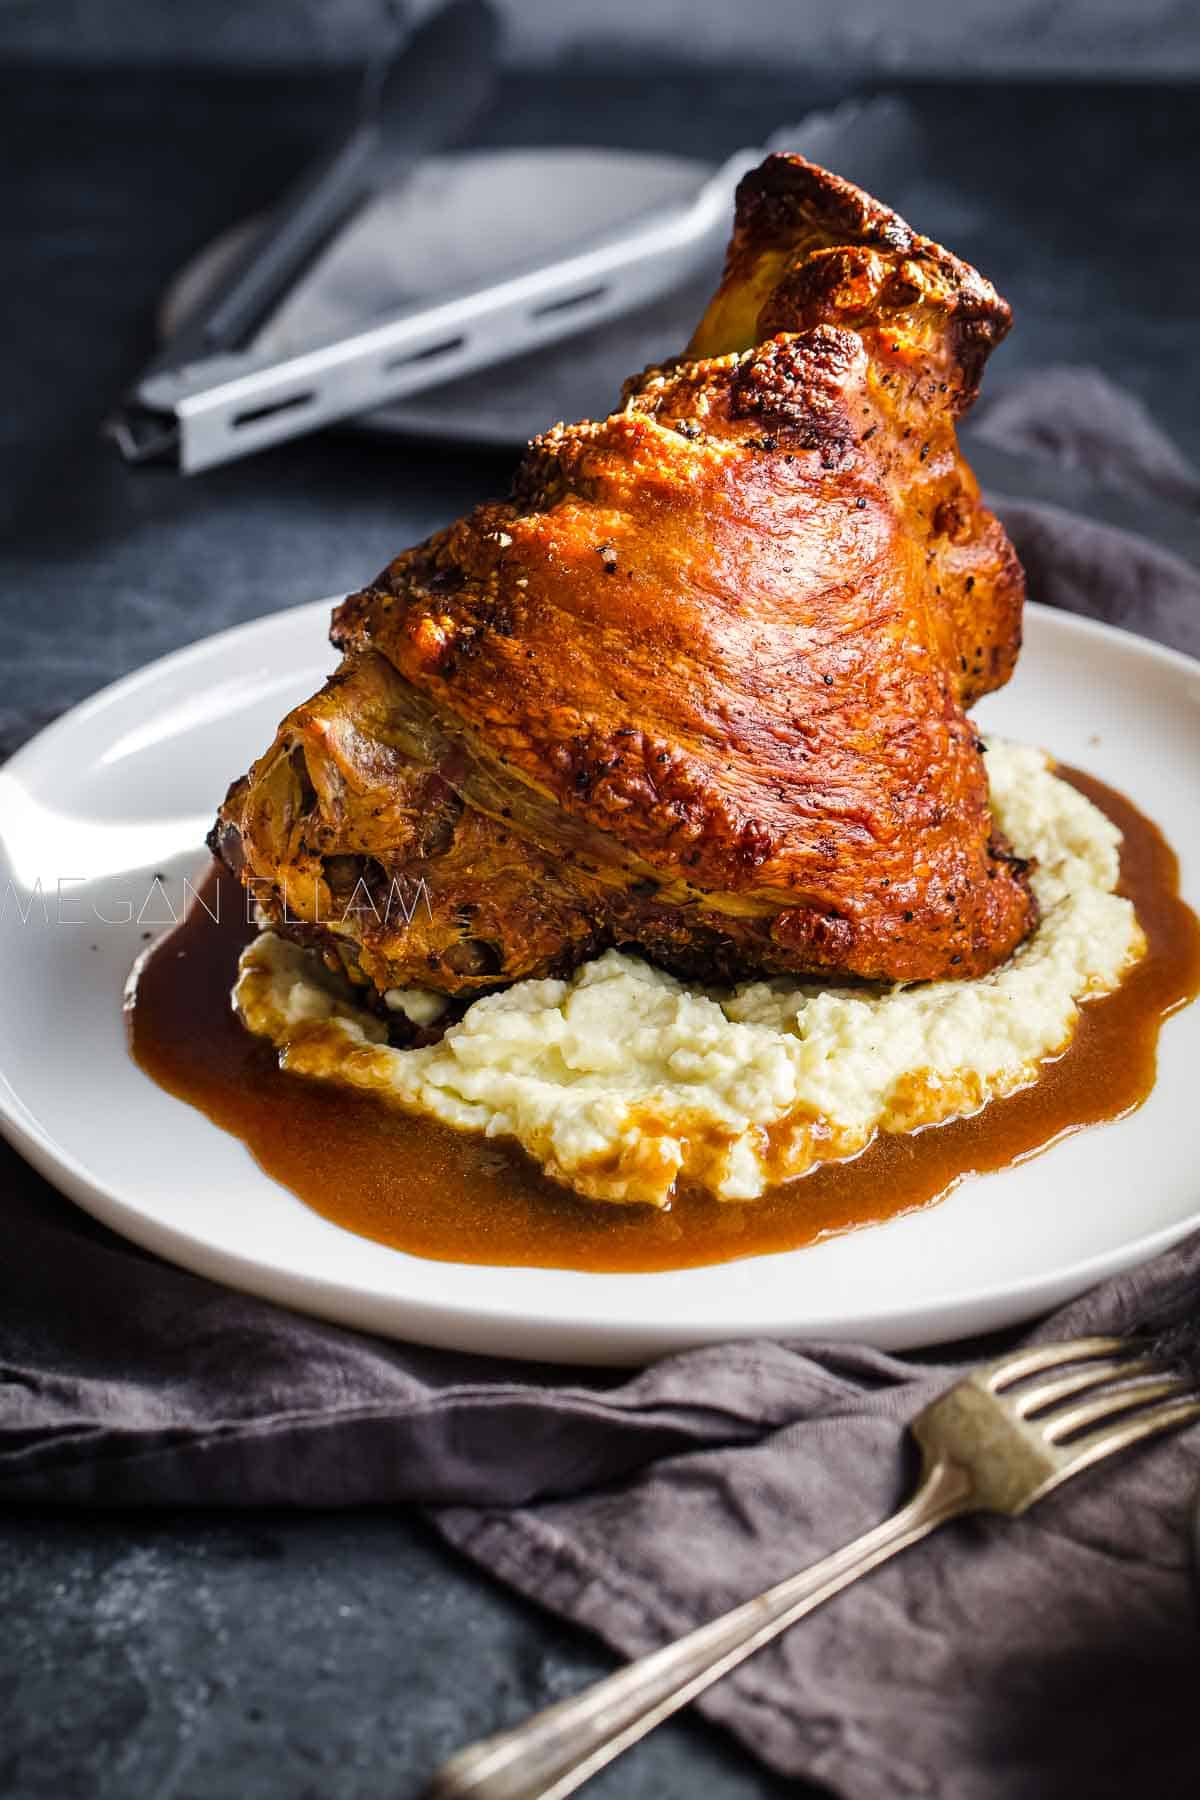 A pork hock cooked until golden and crispy on a bed of cauliflower mash and gravy.